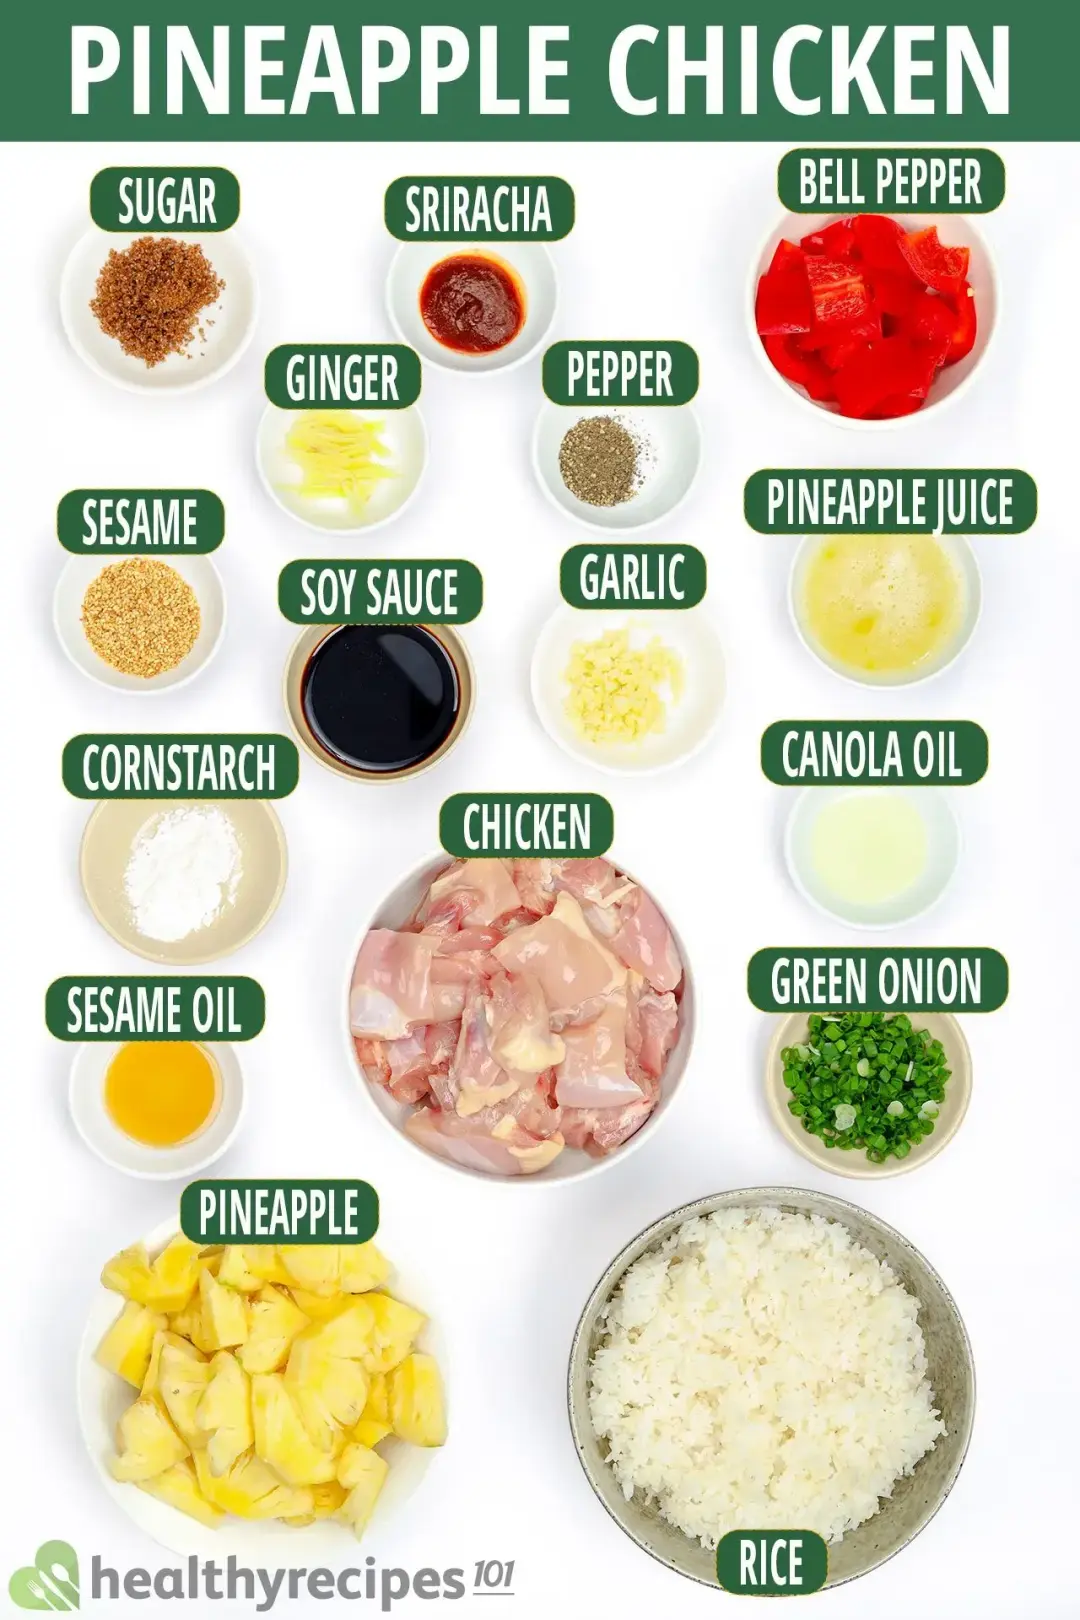 Ingredients for Pineapple Chicken